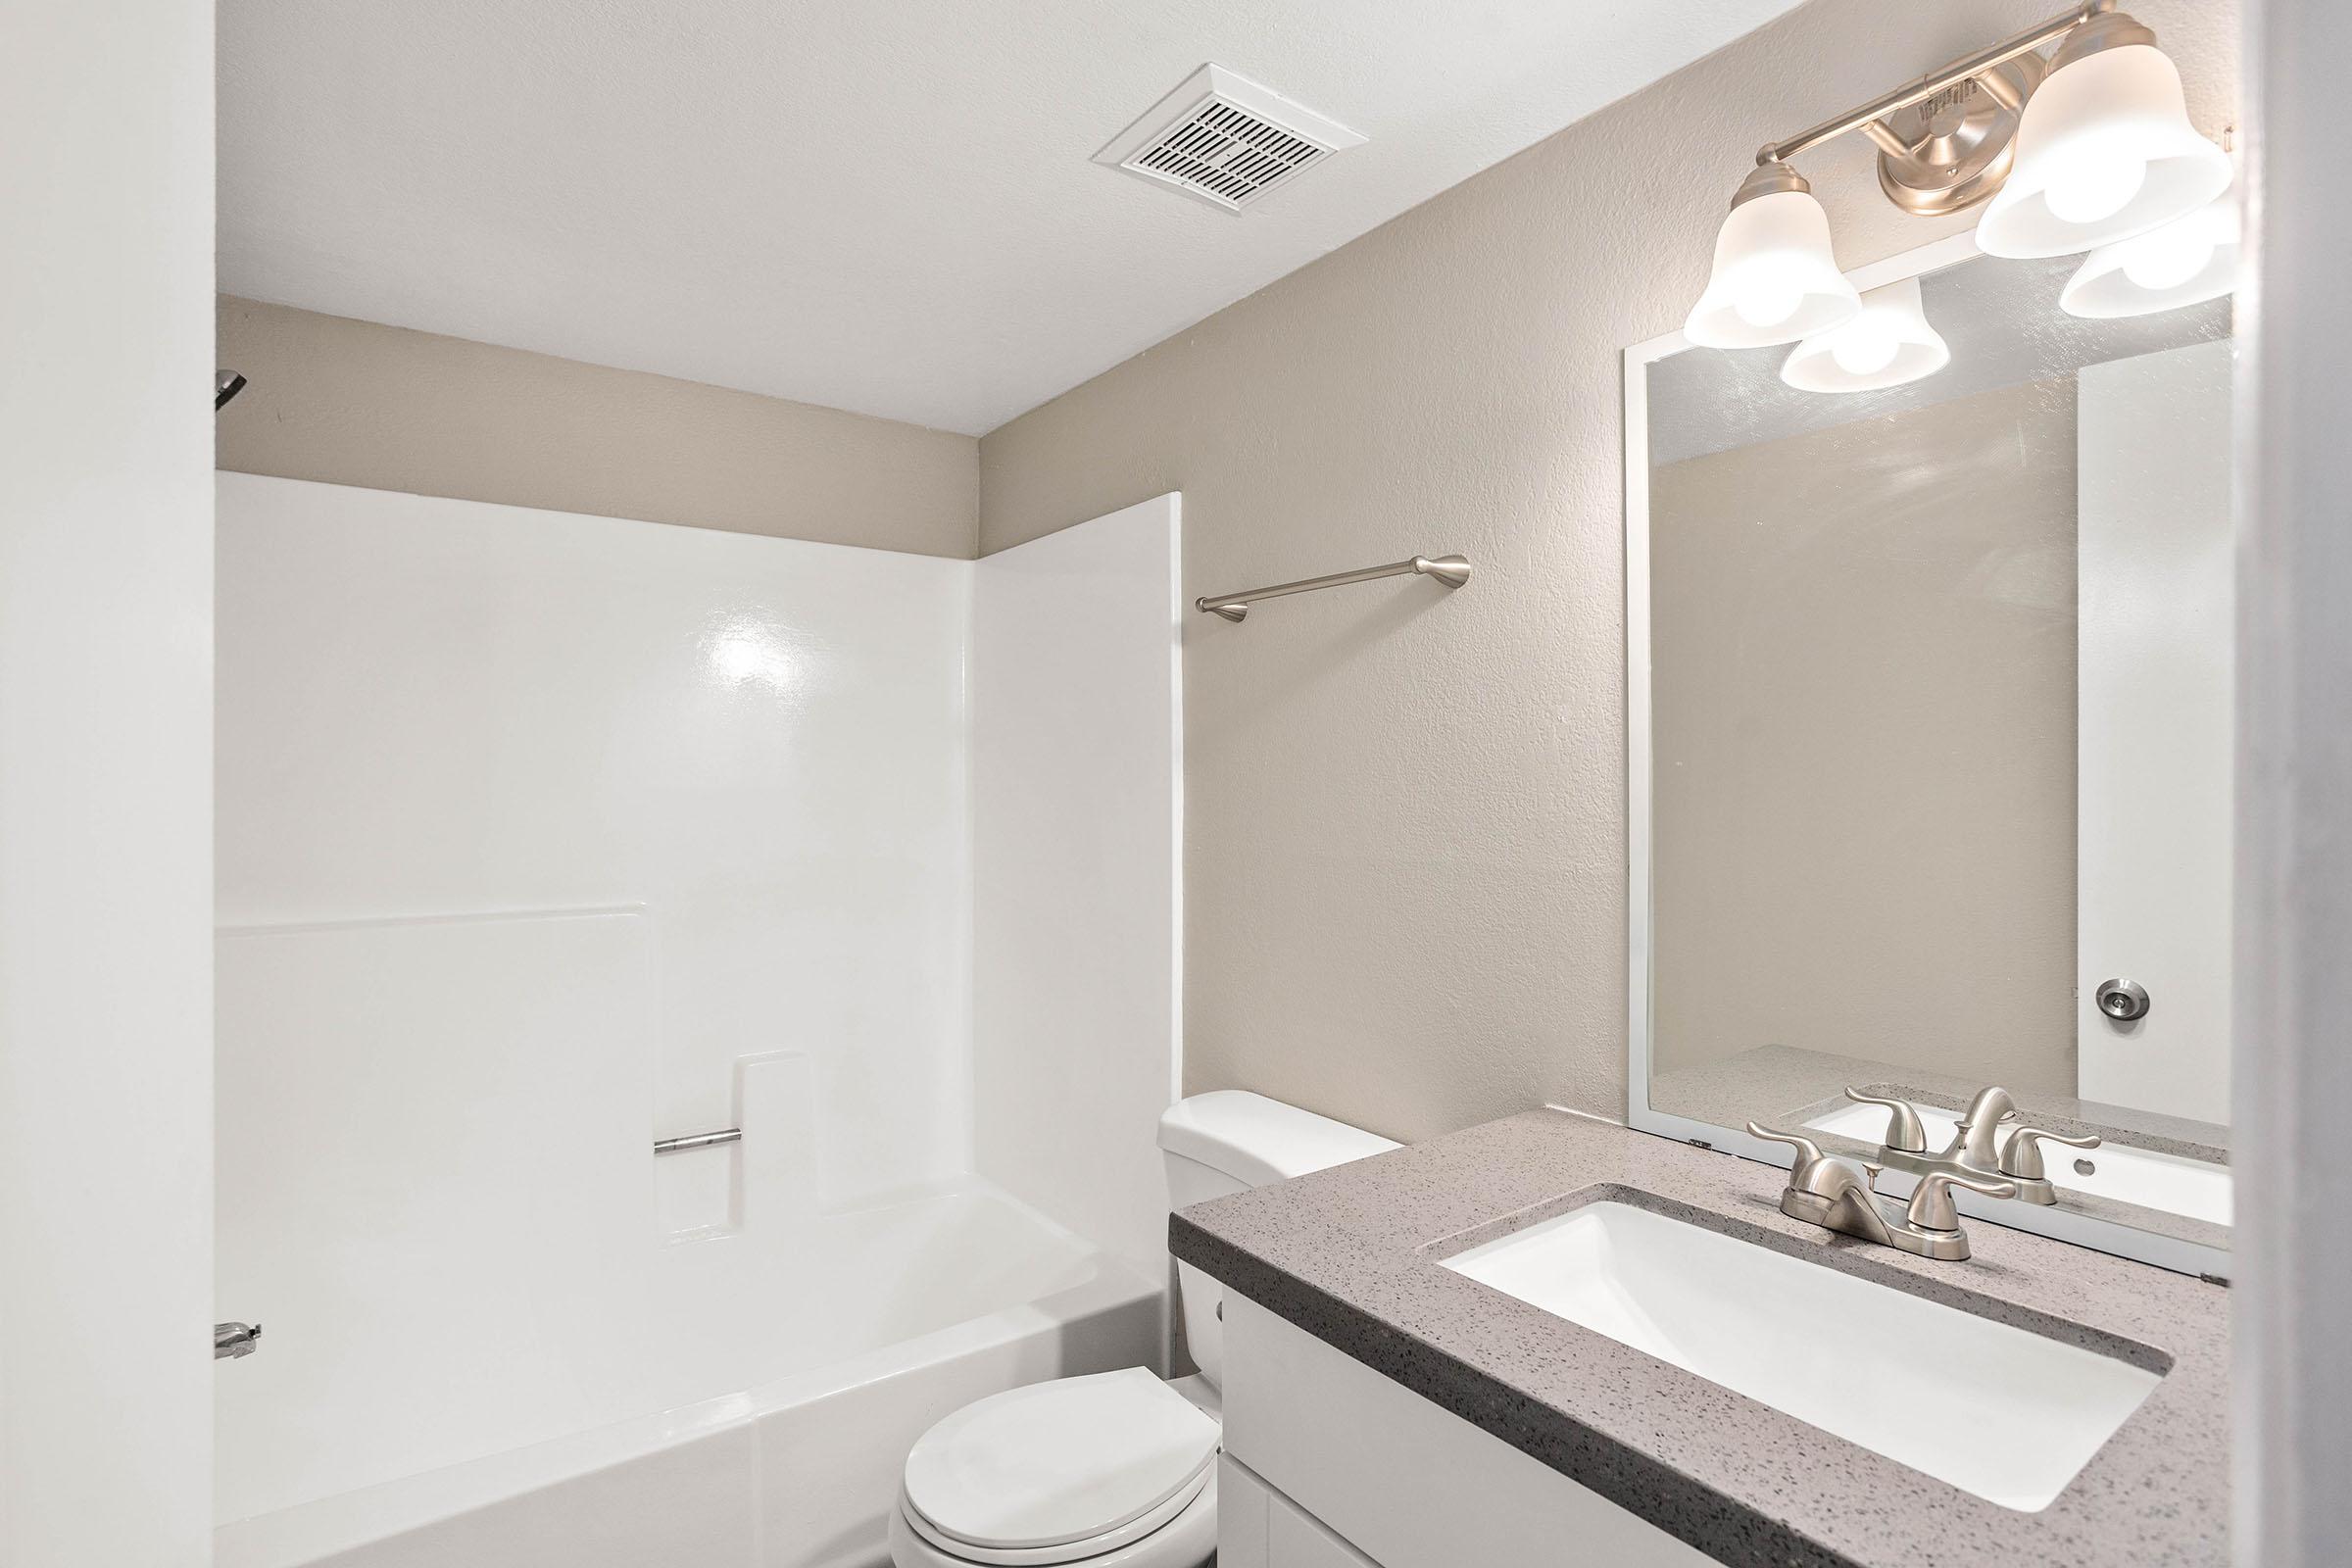 Renovated bathroom with mirrored sink vanity, toilet, and shower tub